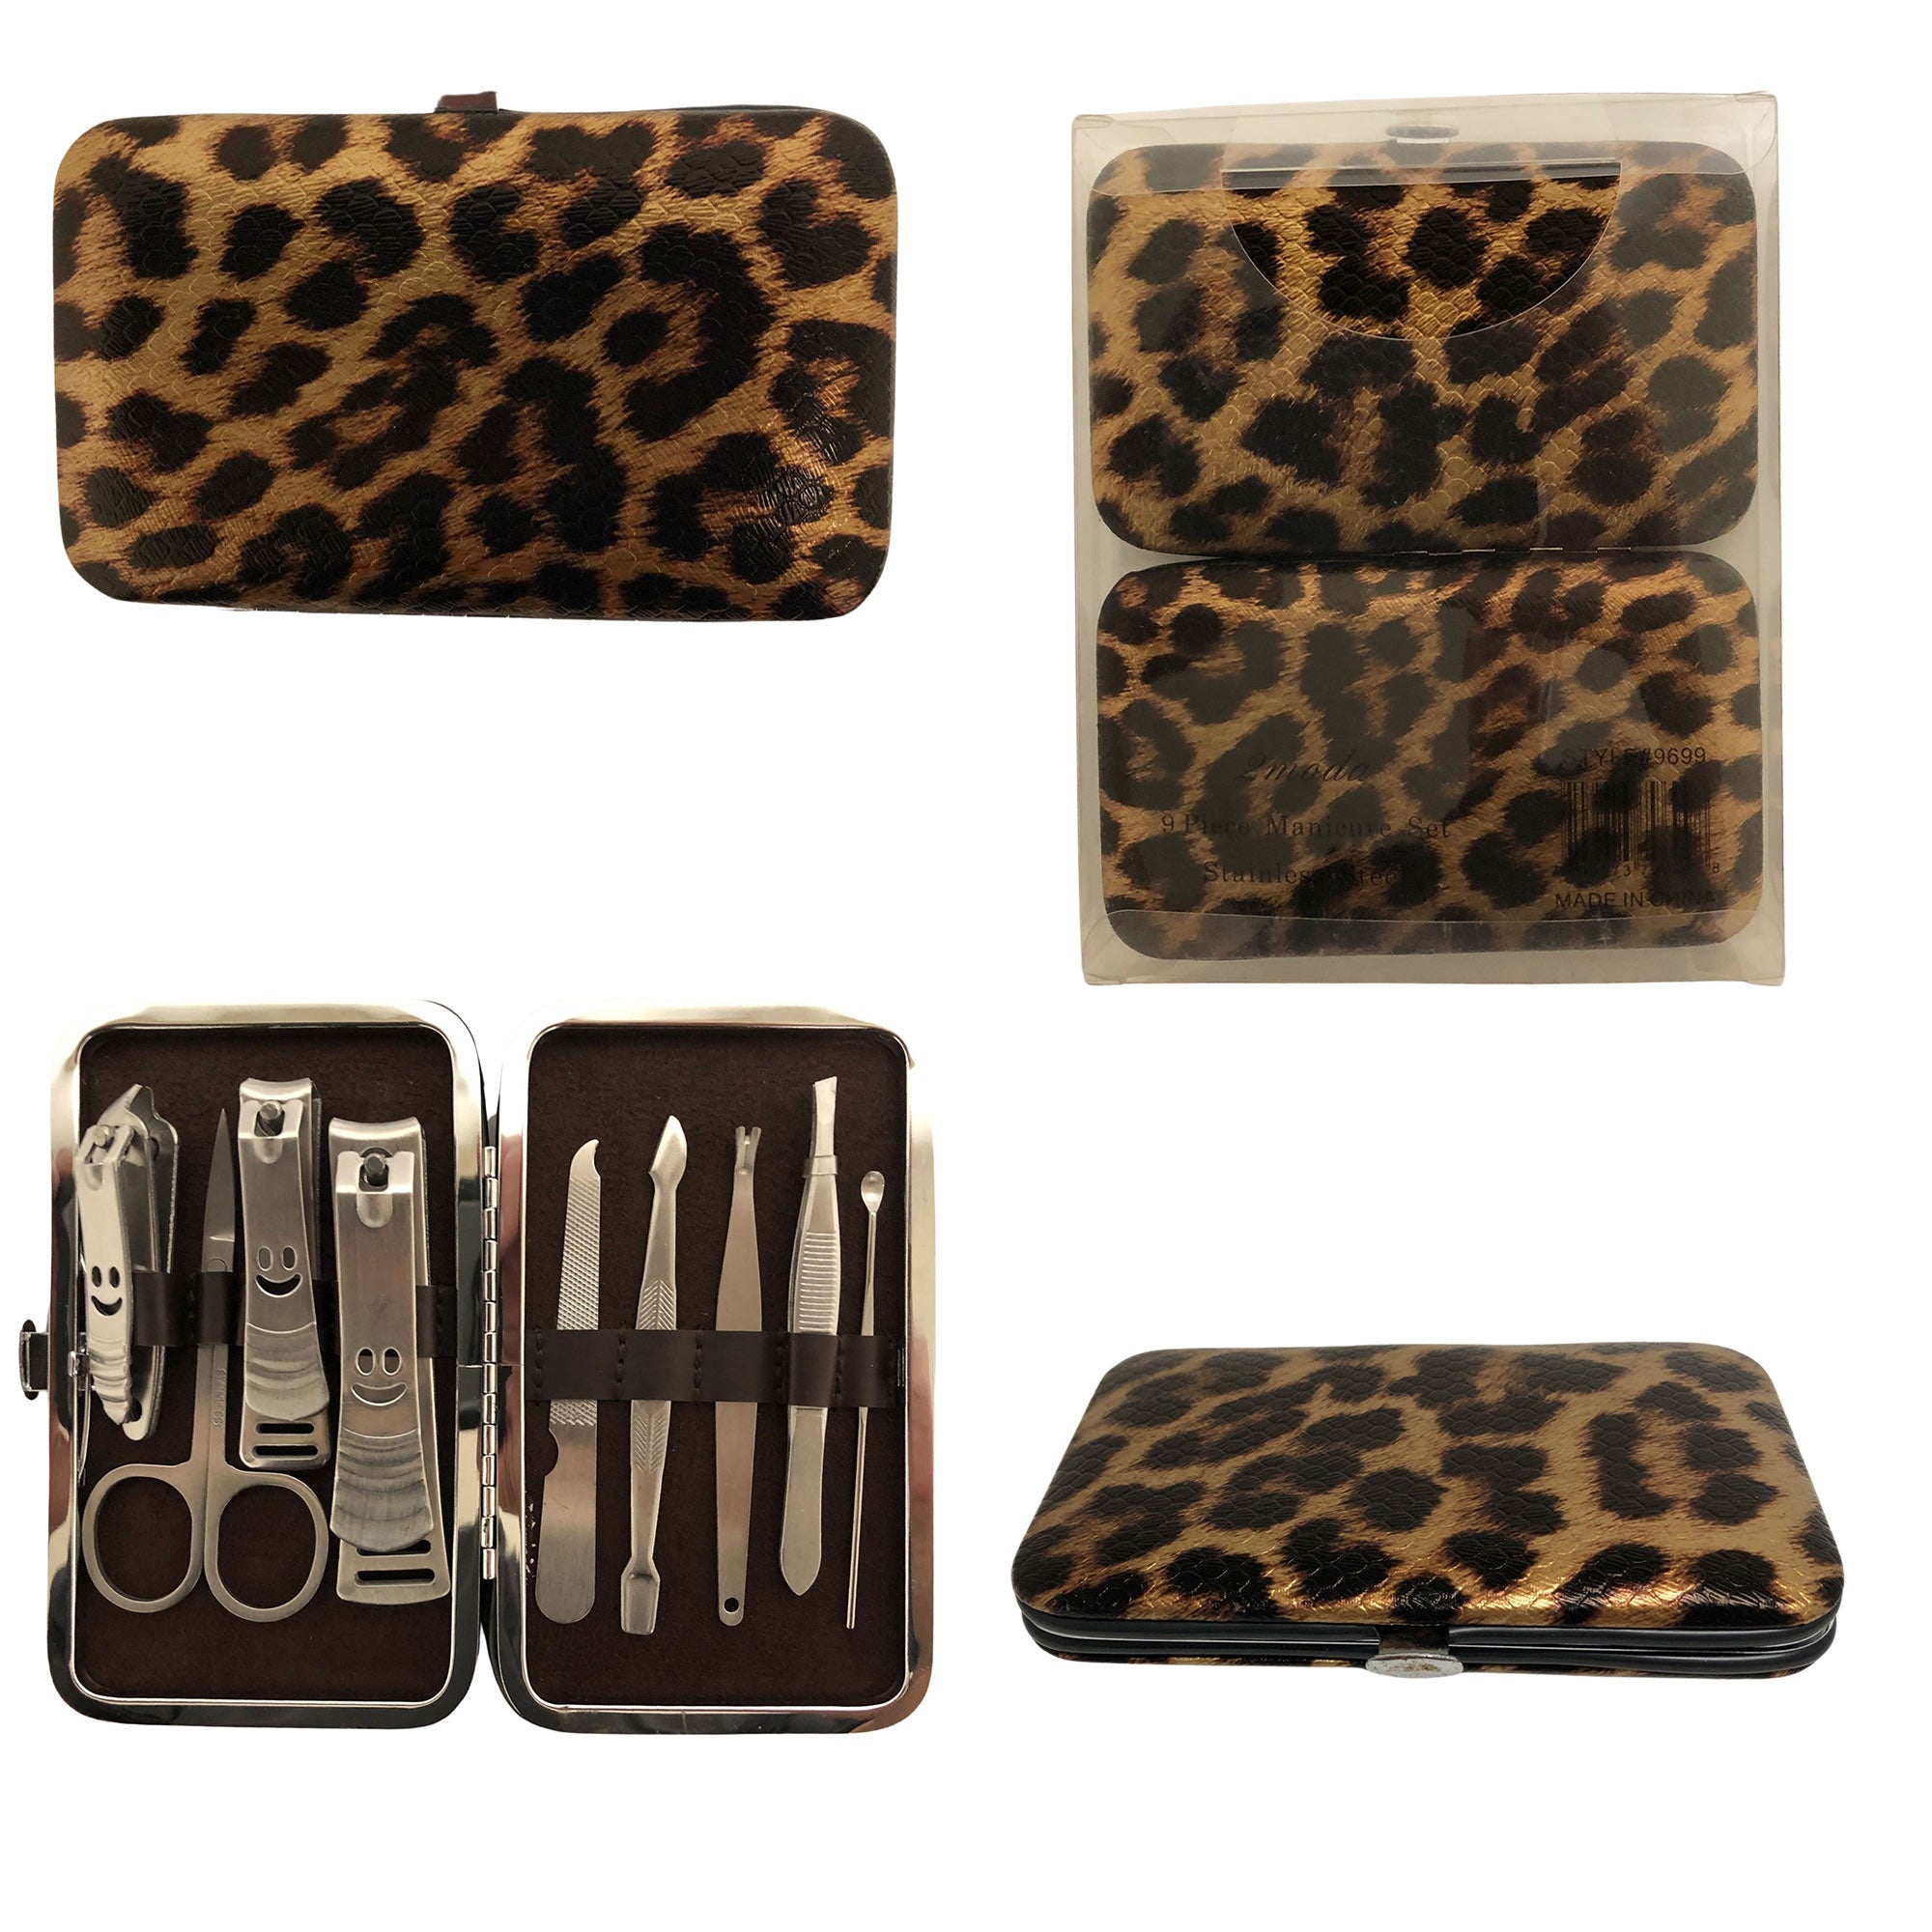 CLEARANCE MANICURE SET IN GOLD LEOPARD CASE (CASE OF 24 - $2.50 / PIECE)  Wholesale 9 Piece Stainless Steel Manicure Set in Gold Leopard SKU: 9699-LEO-GOLD-24